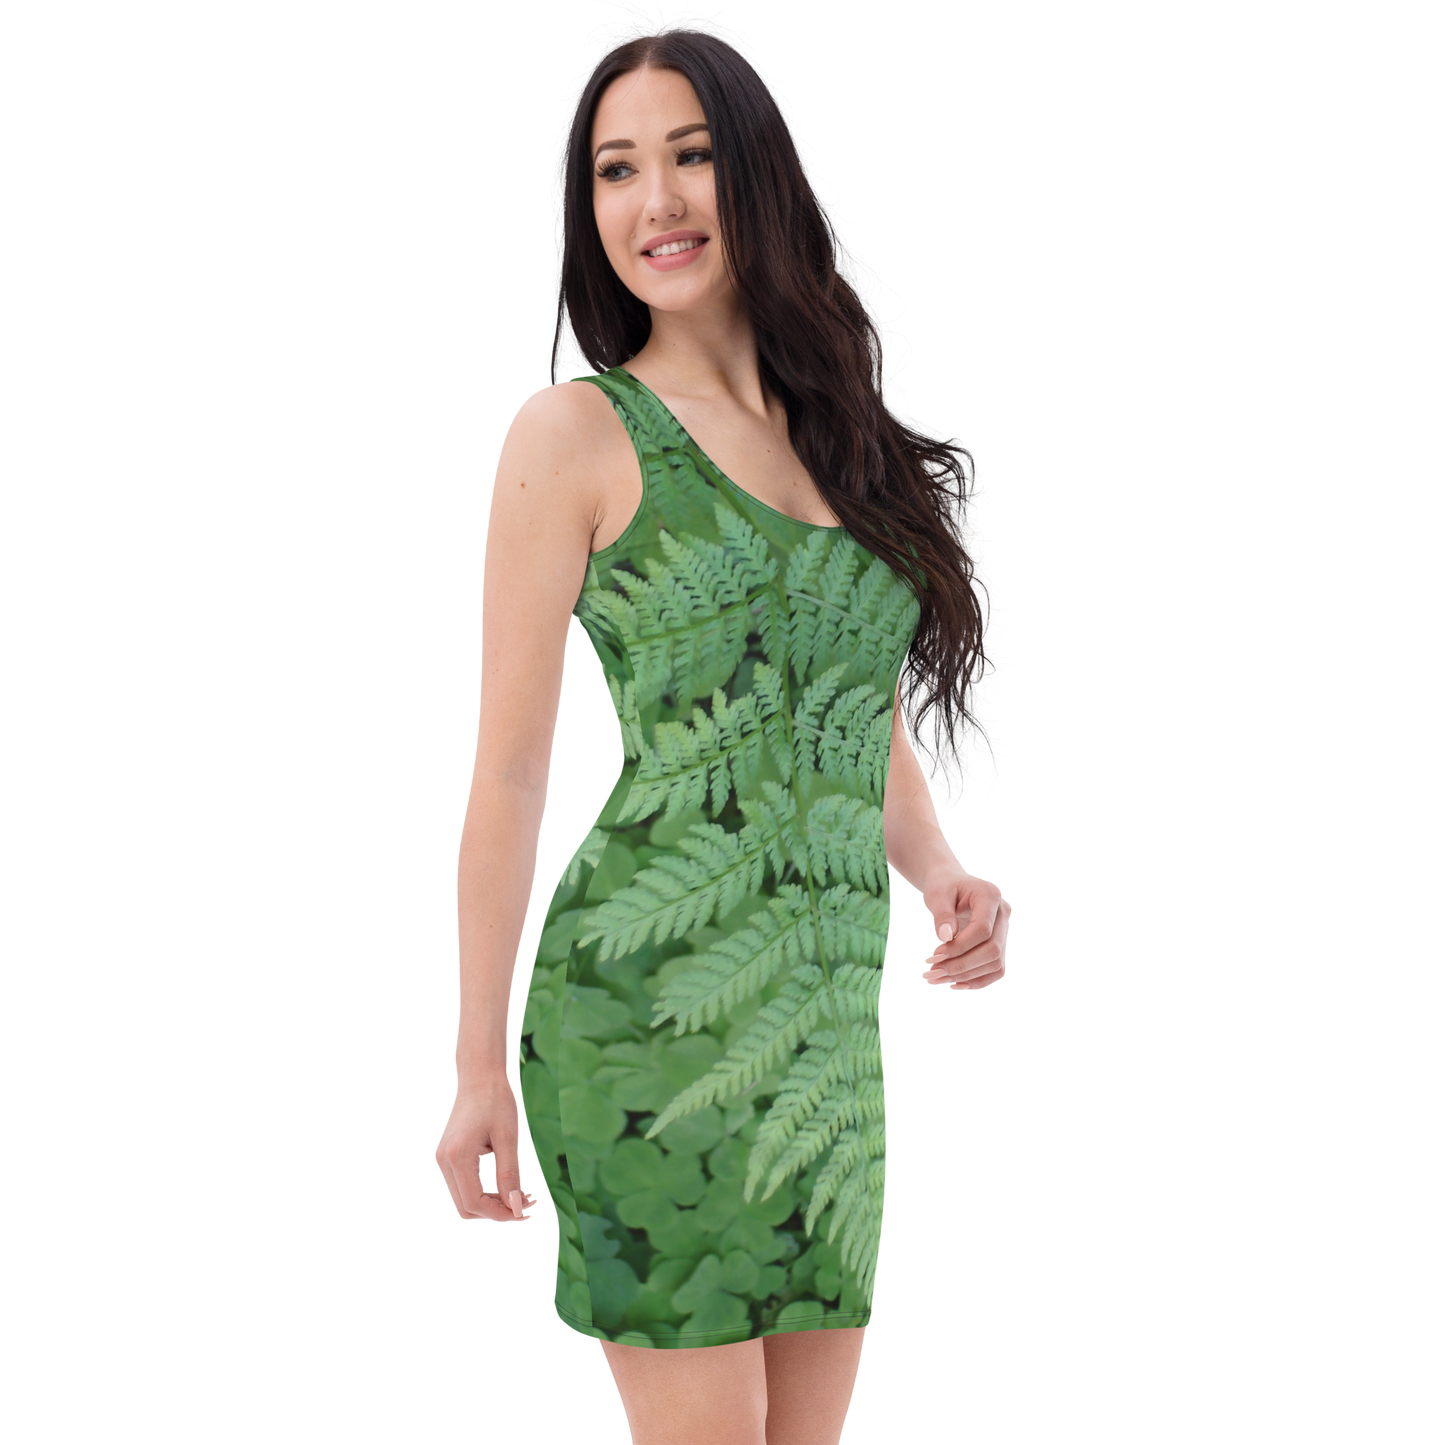 The EARTH LOVE Collection - "A Forest Fern" Design Tank Dress